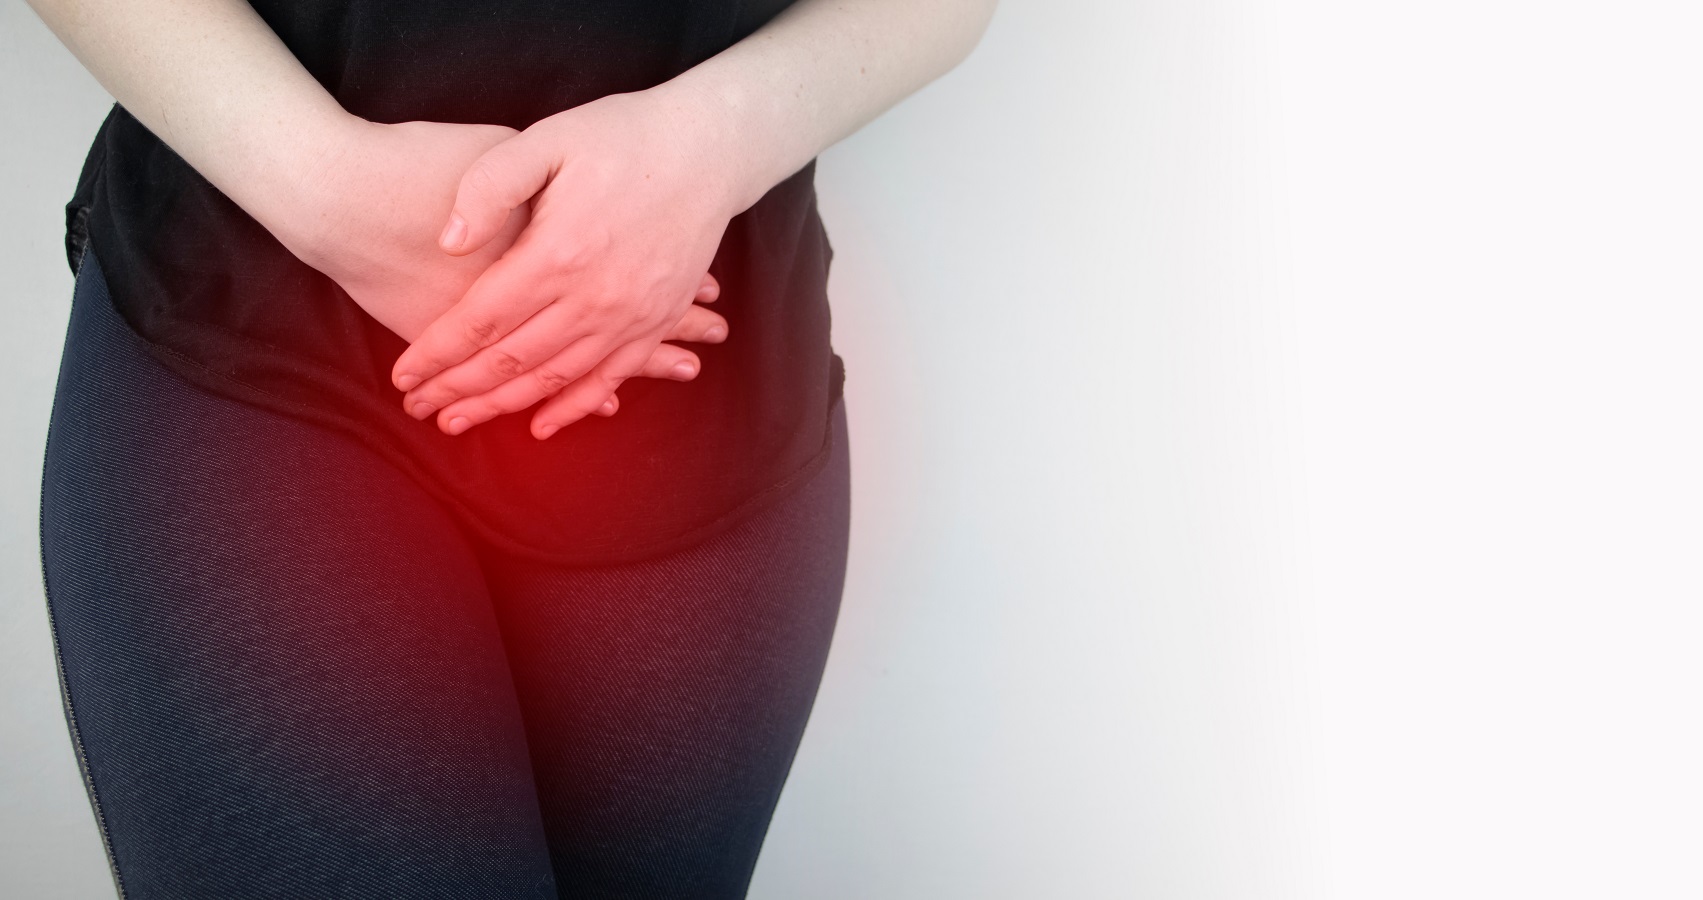 Woman with urinary incontinence problem | Dr. Amy Martin in Dallas, TX